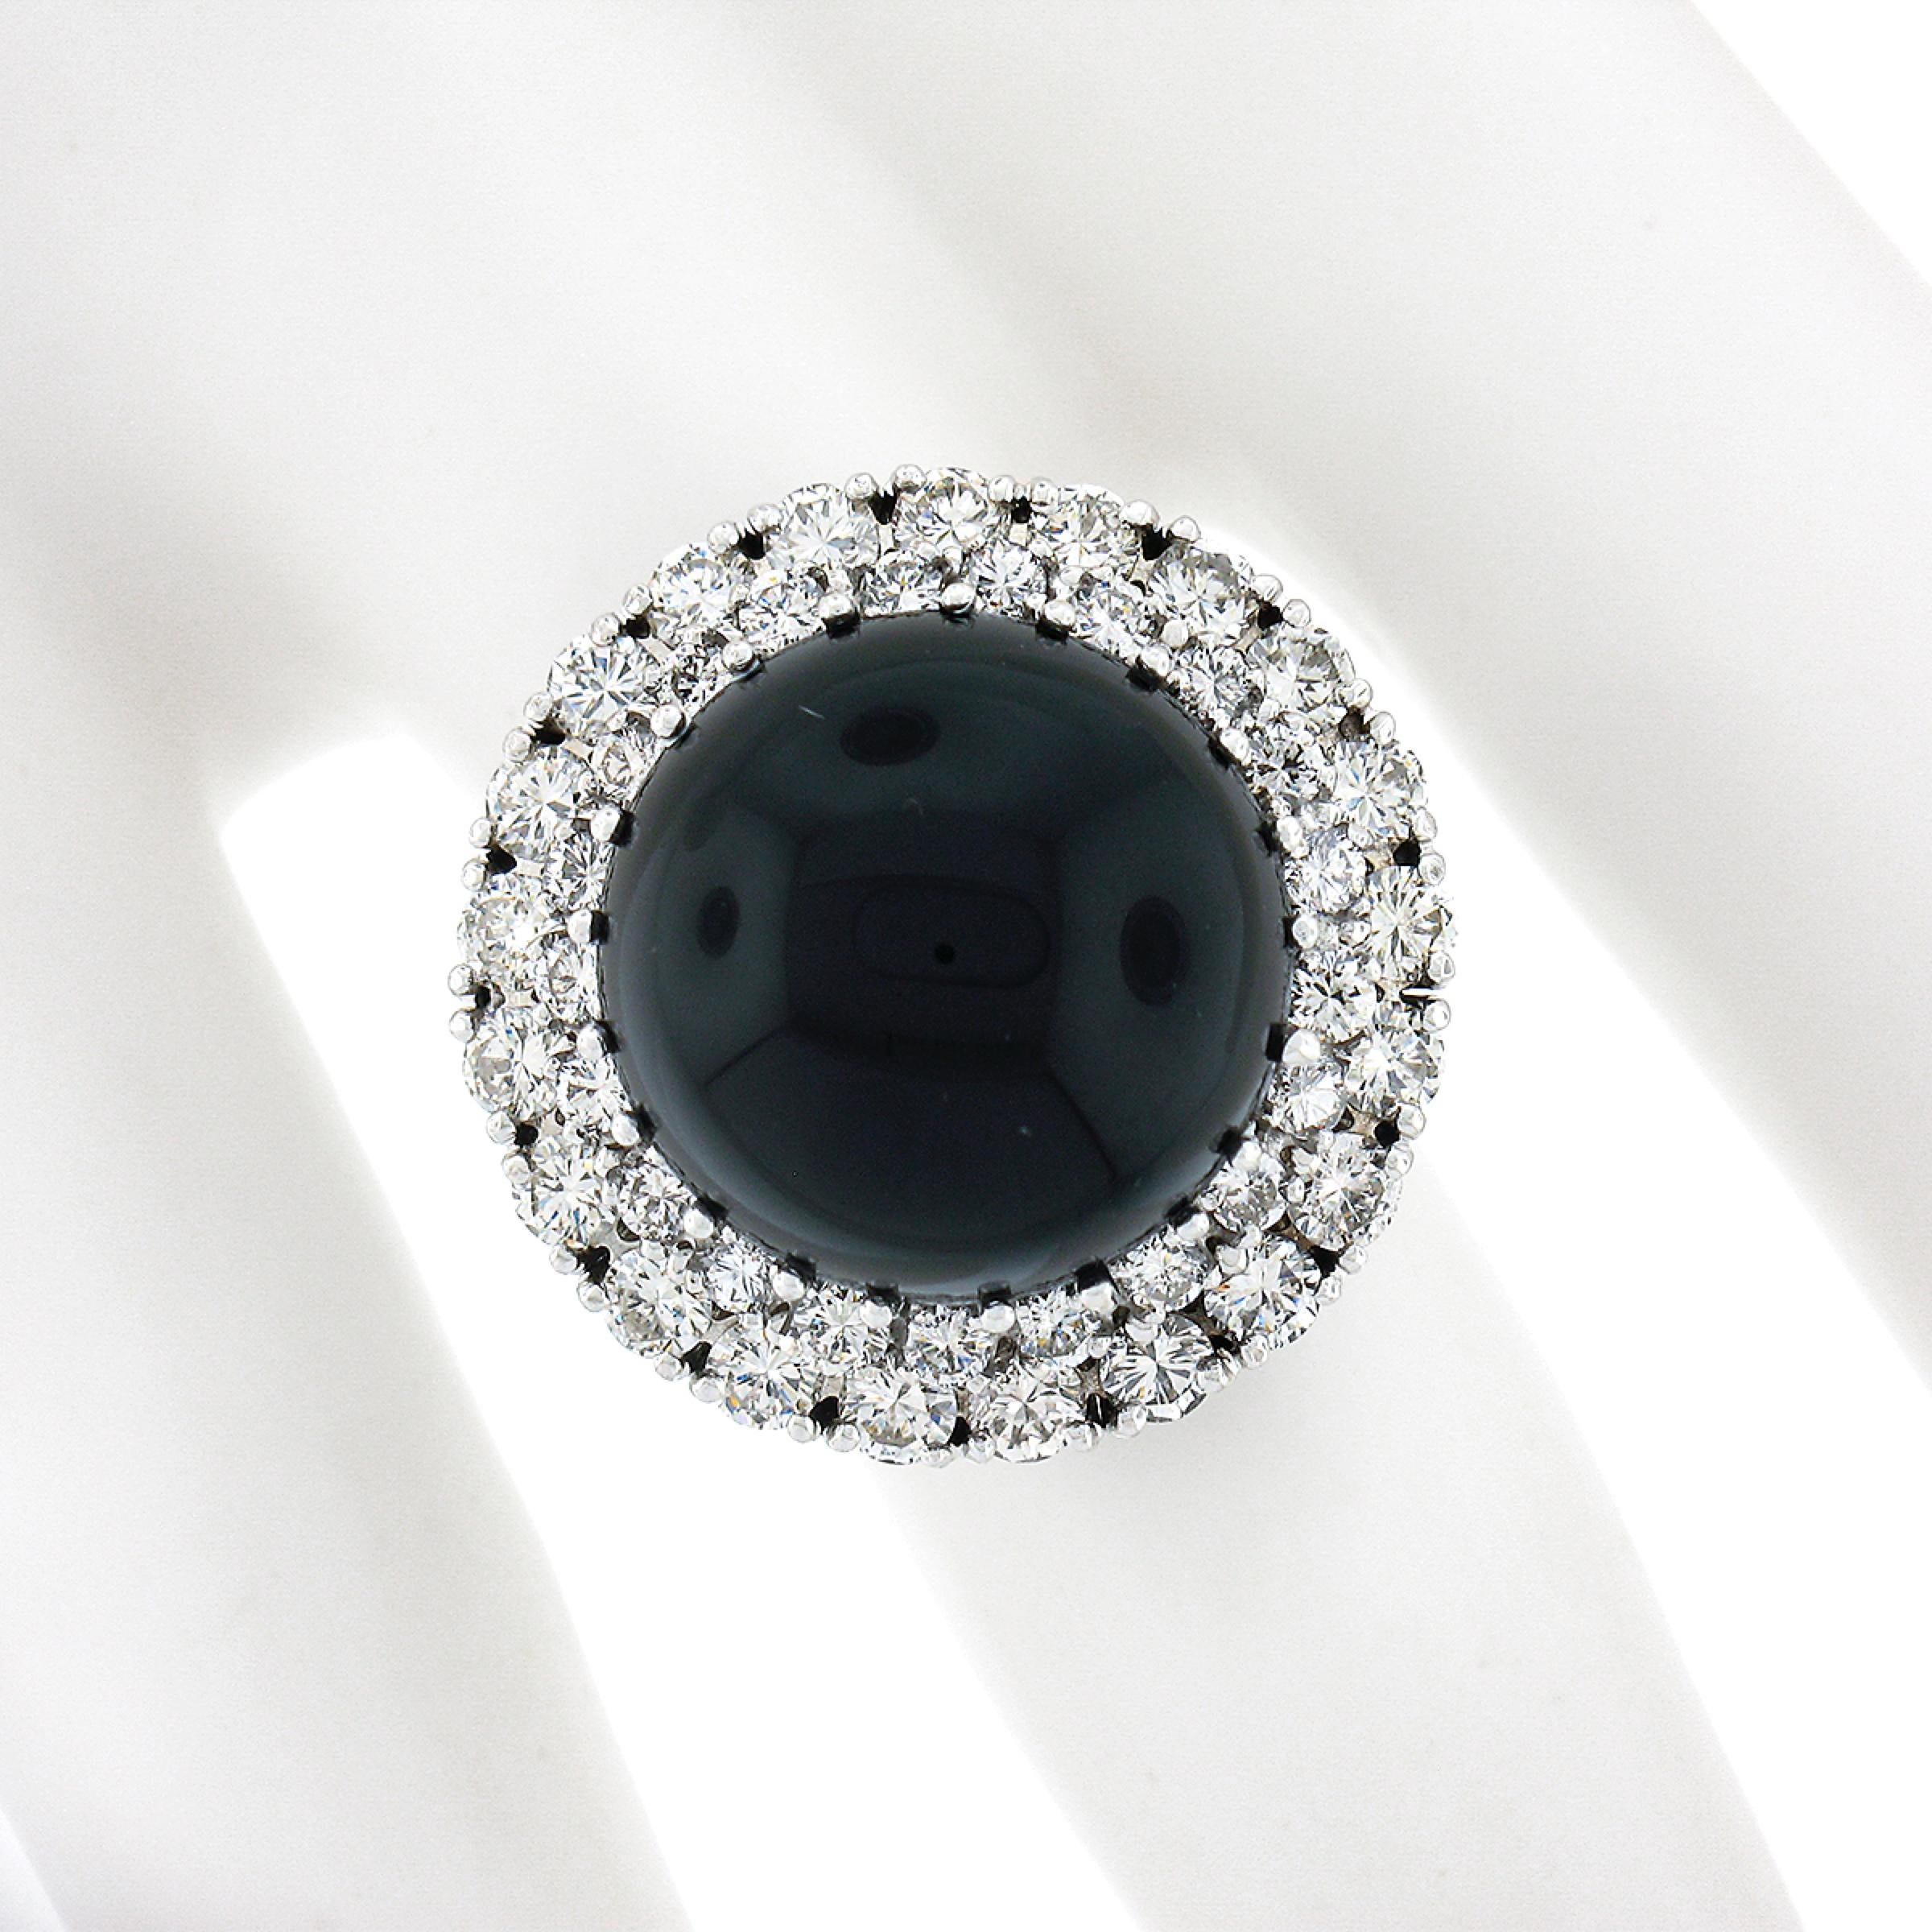 Vintage 18K White Gold Round Cabochon Black Onyx Diamond Dual Halo Cocktail Ring In Excellent Condition For Sale In Montclair, NJ